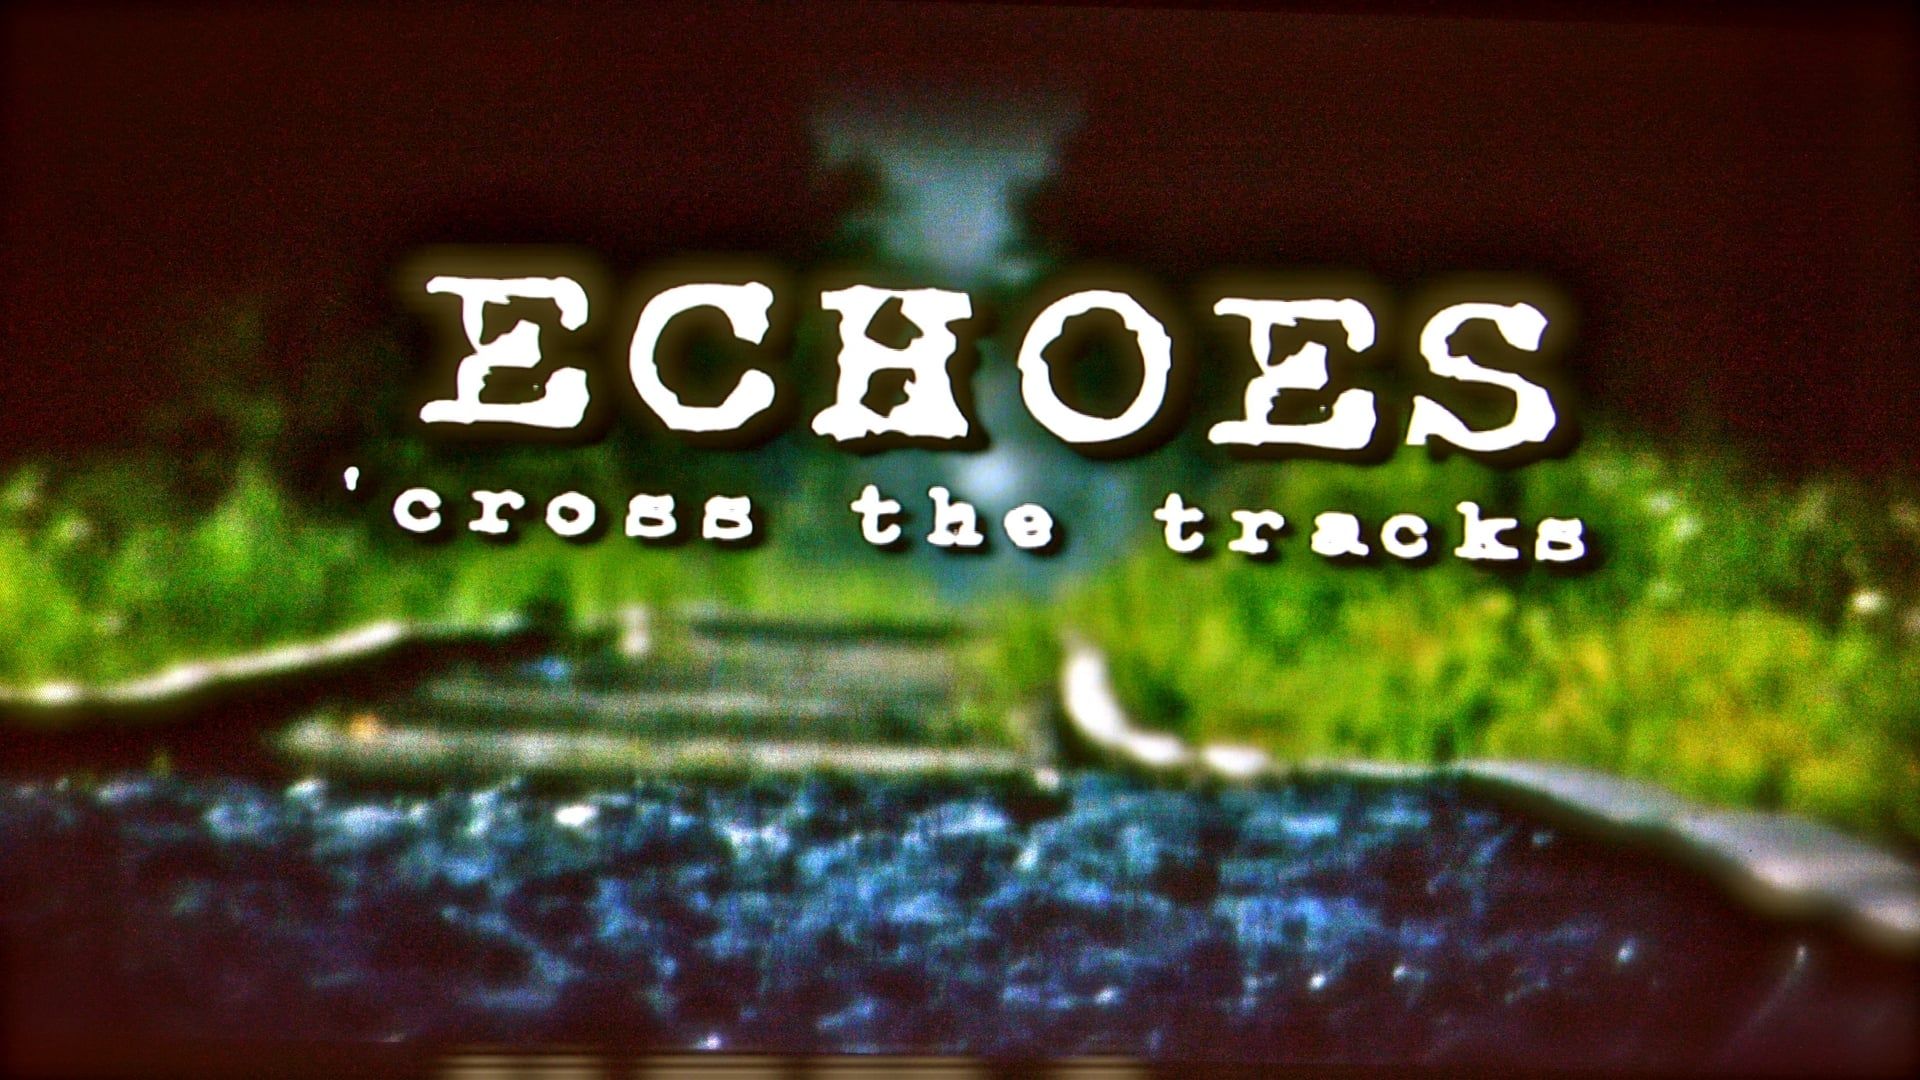 Echoes Cross the Tracks background